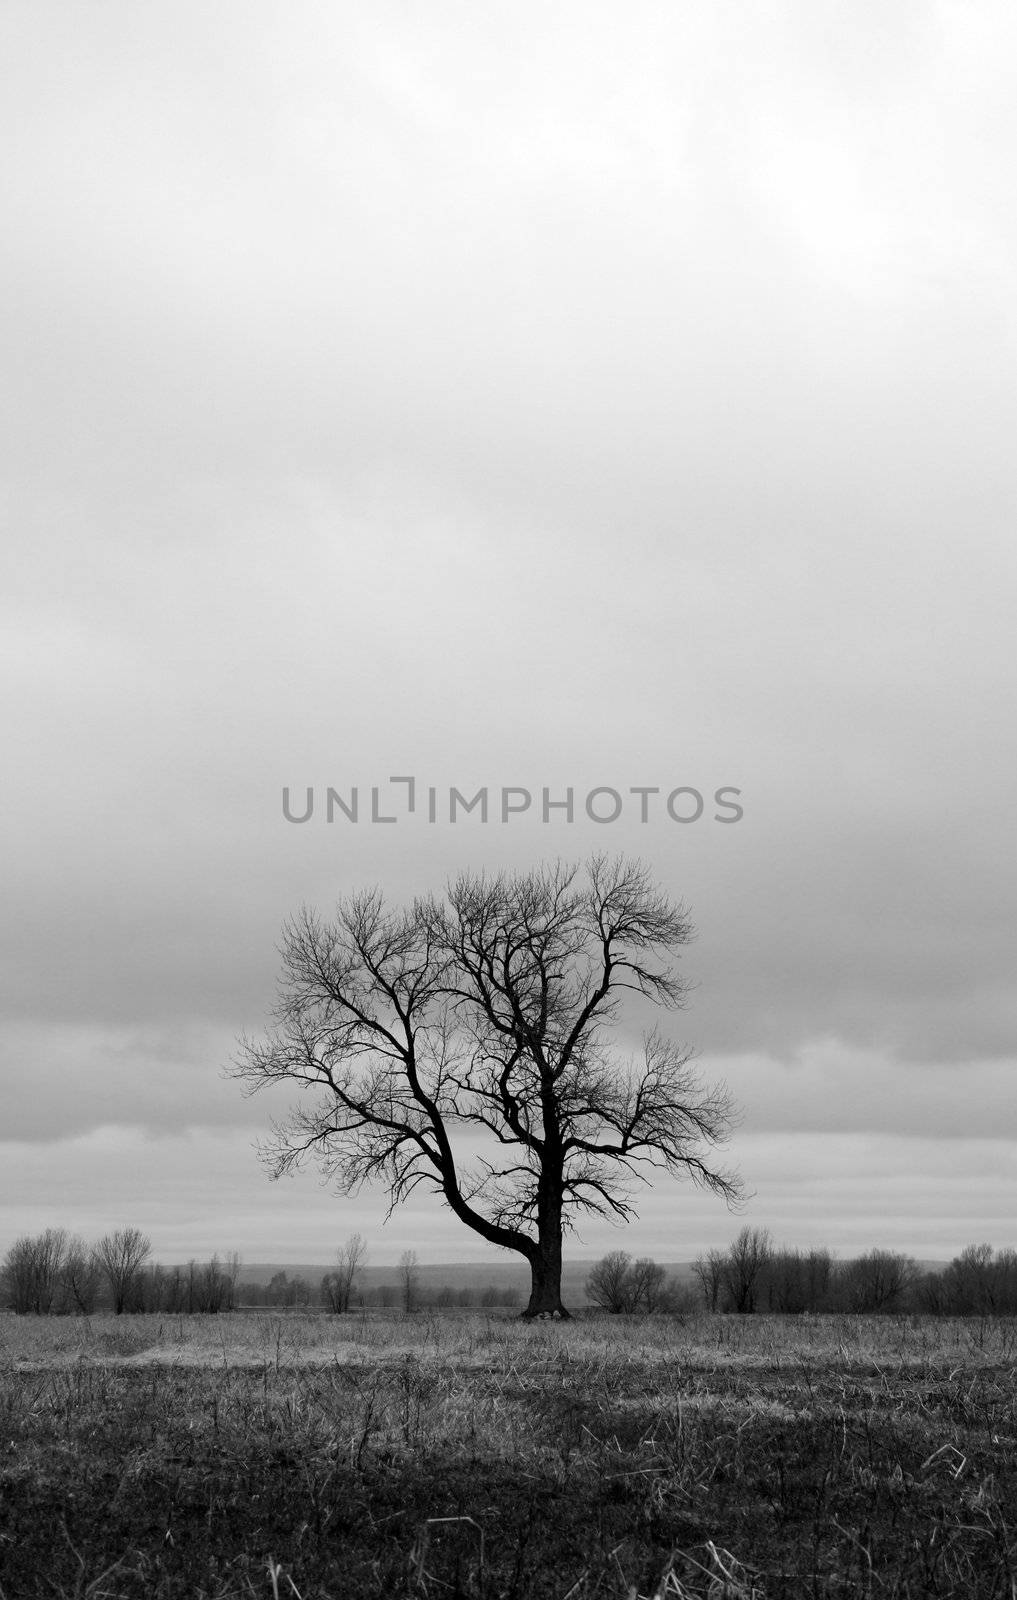 Lonely tree in a spring field by anikasalsera